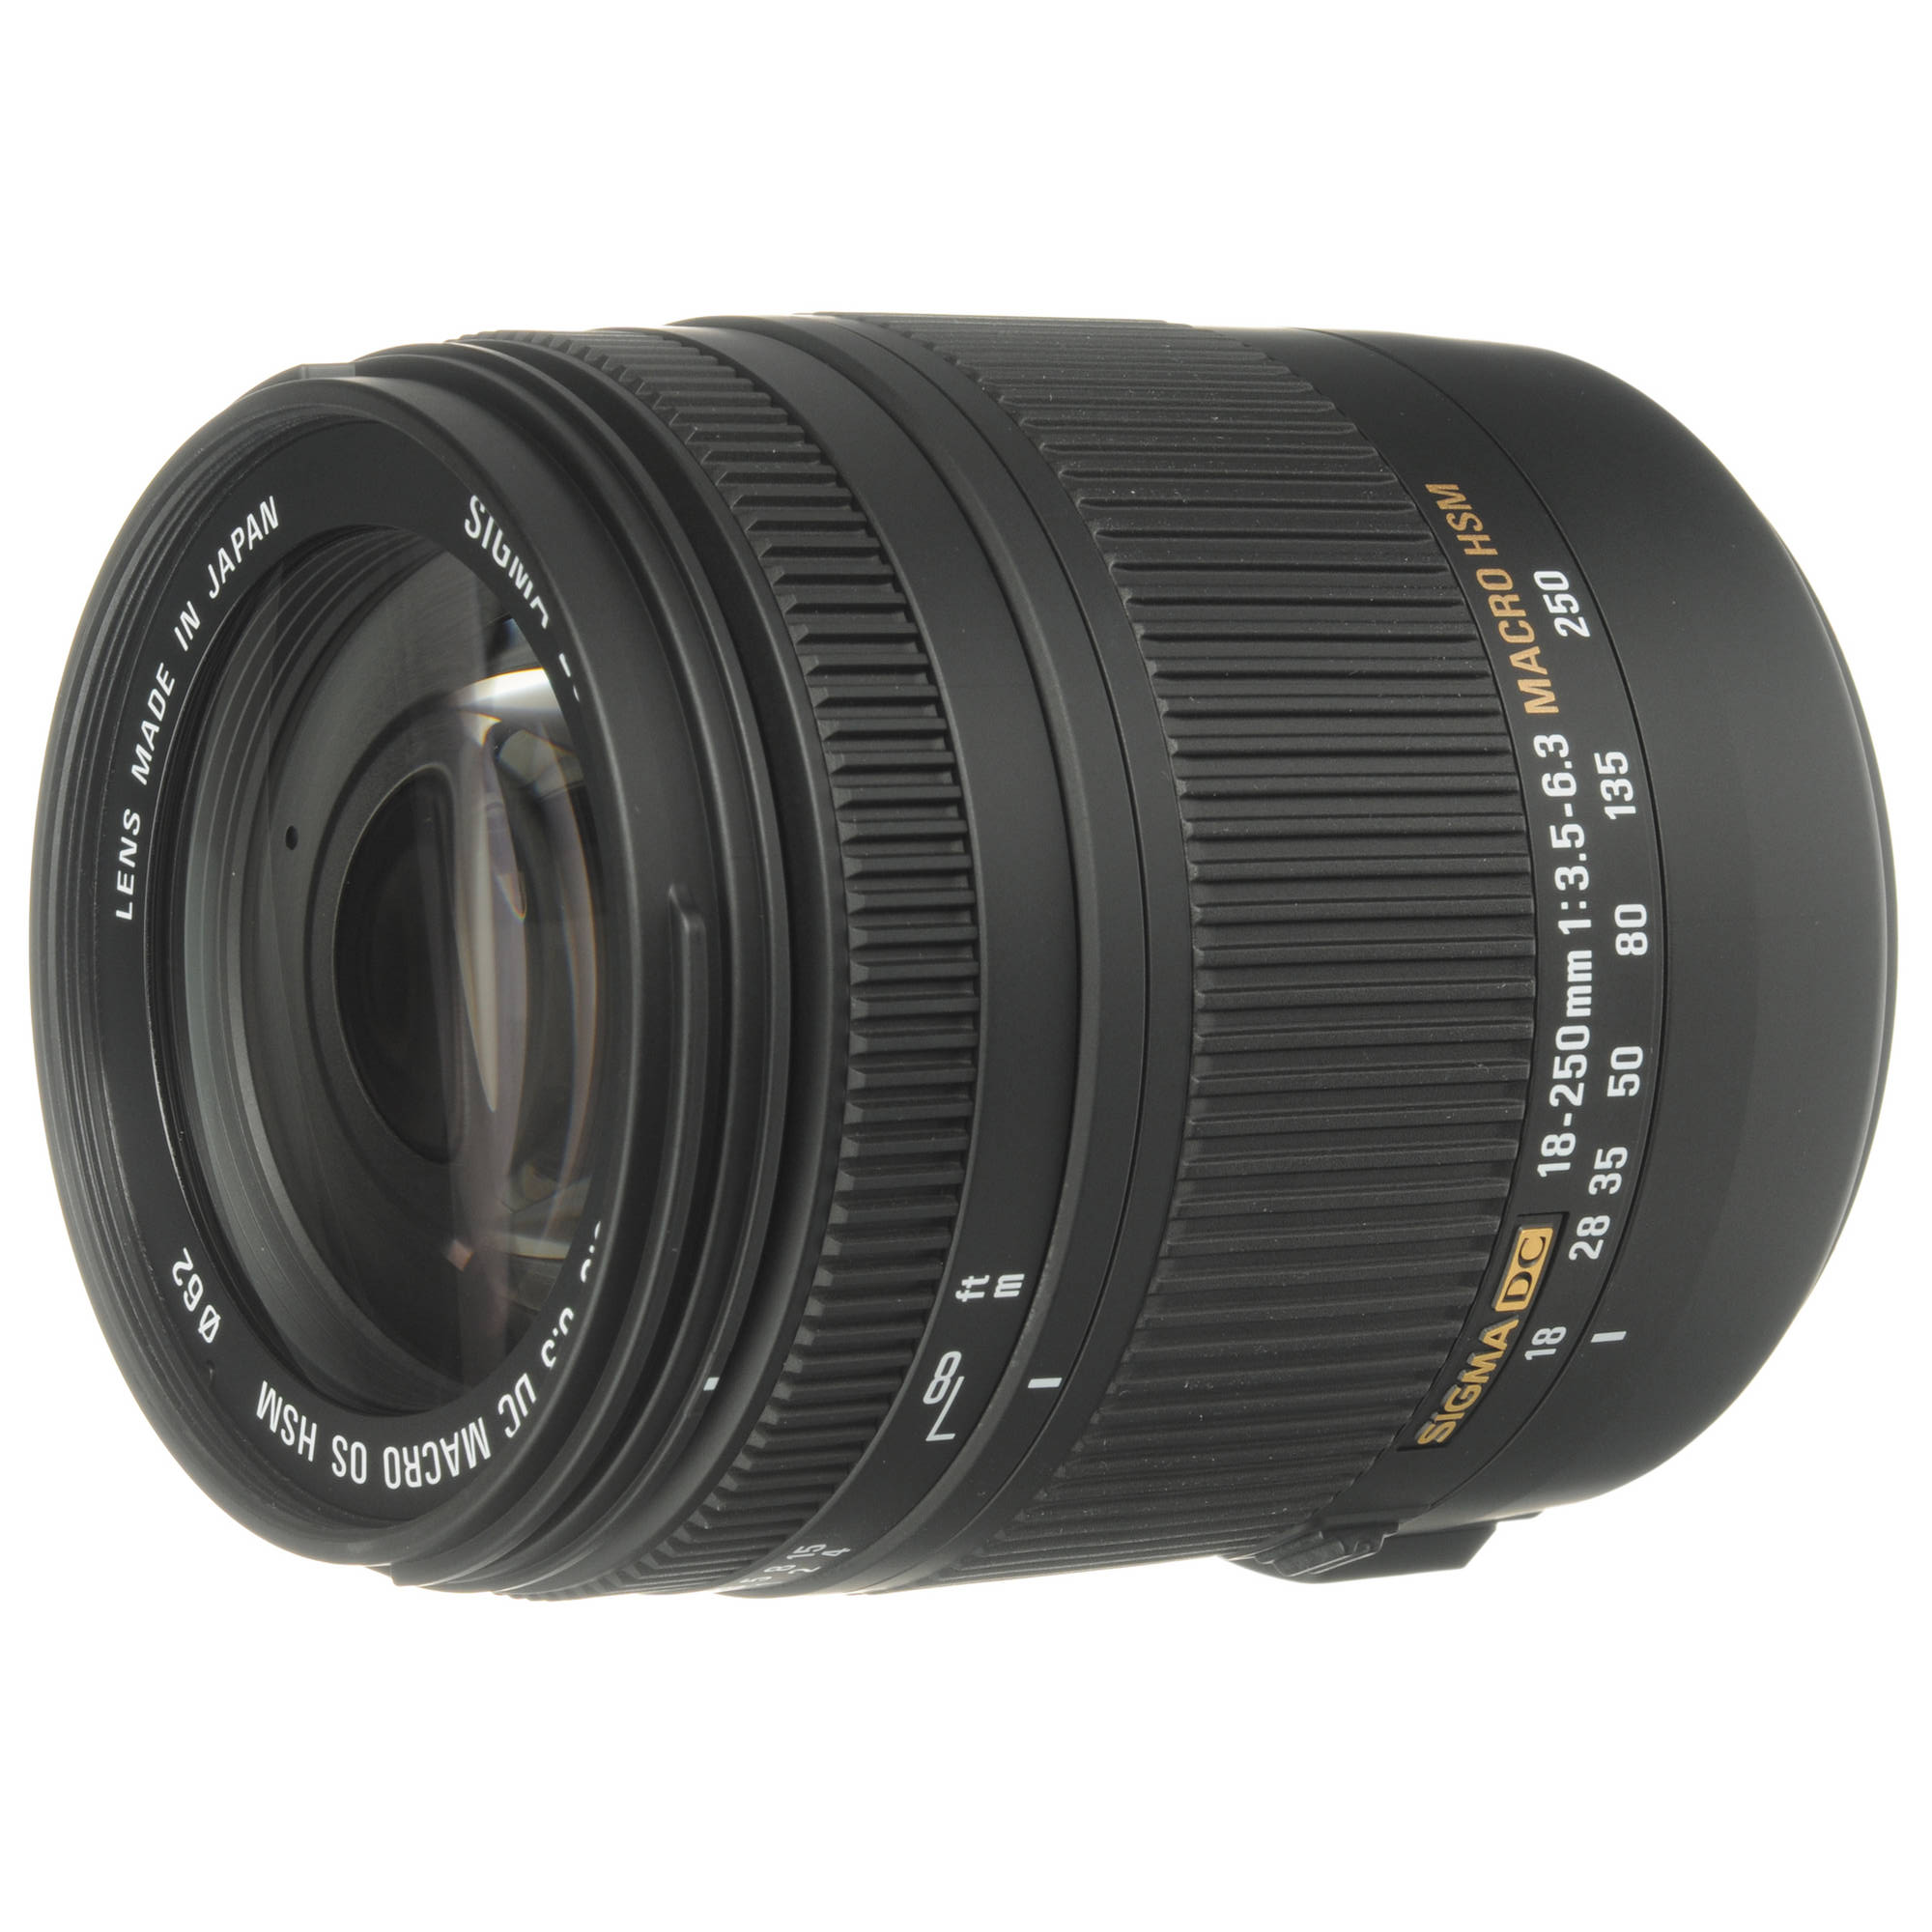 Hot Deal – Sigma 18-250mm f/3.5-6.3 DC Macro OS HSM Lens for $219 at BuyDig !